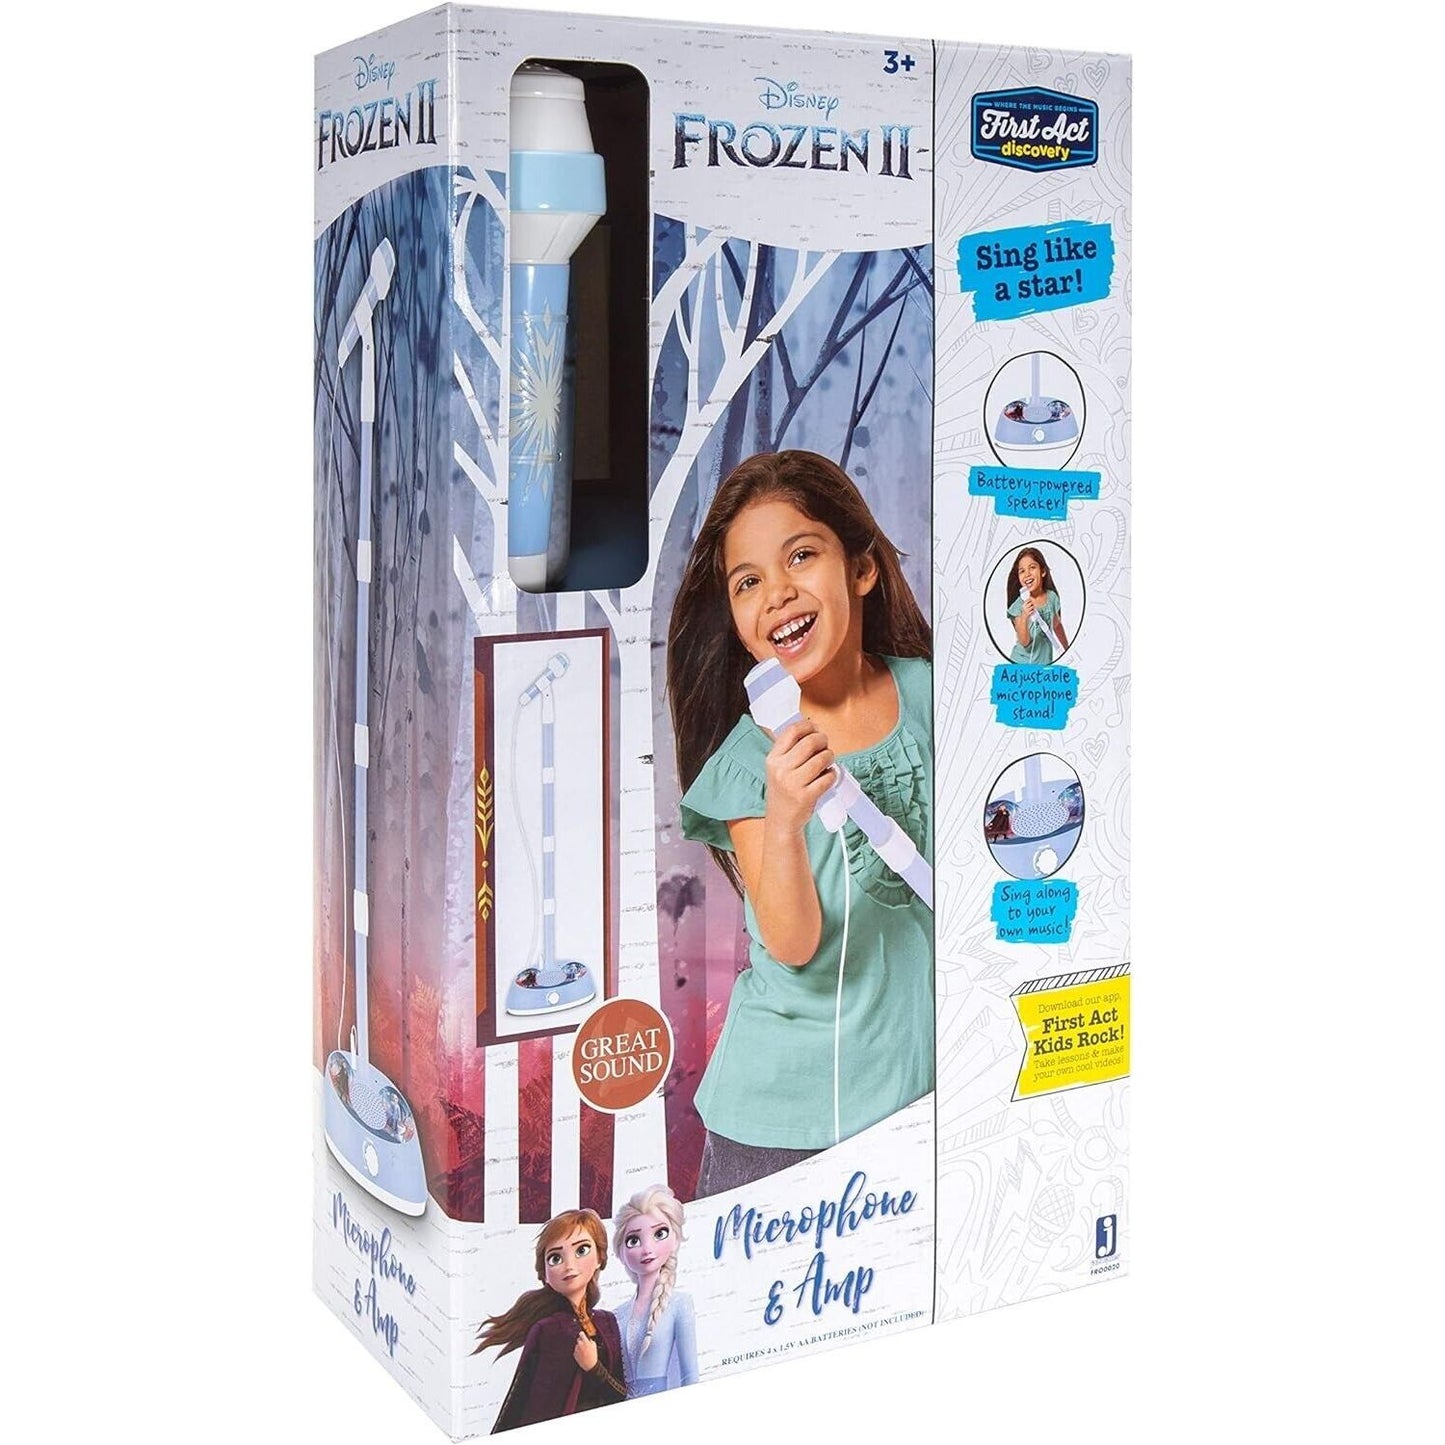 Frozen Microphone & Amp Packaging